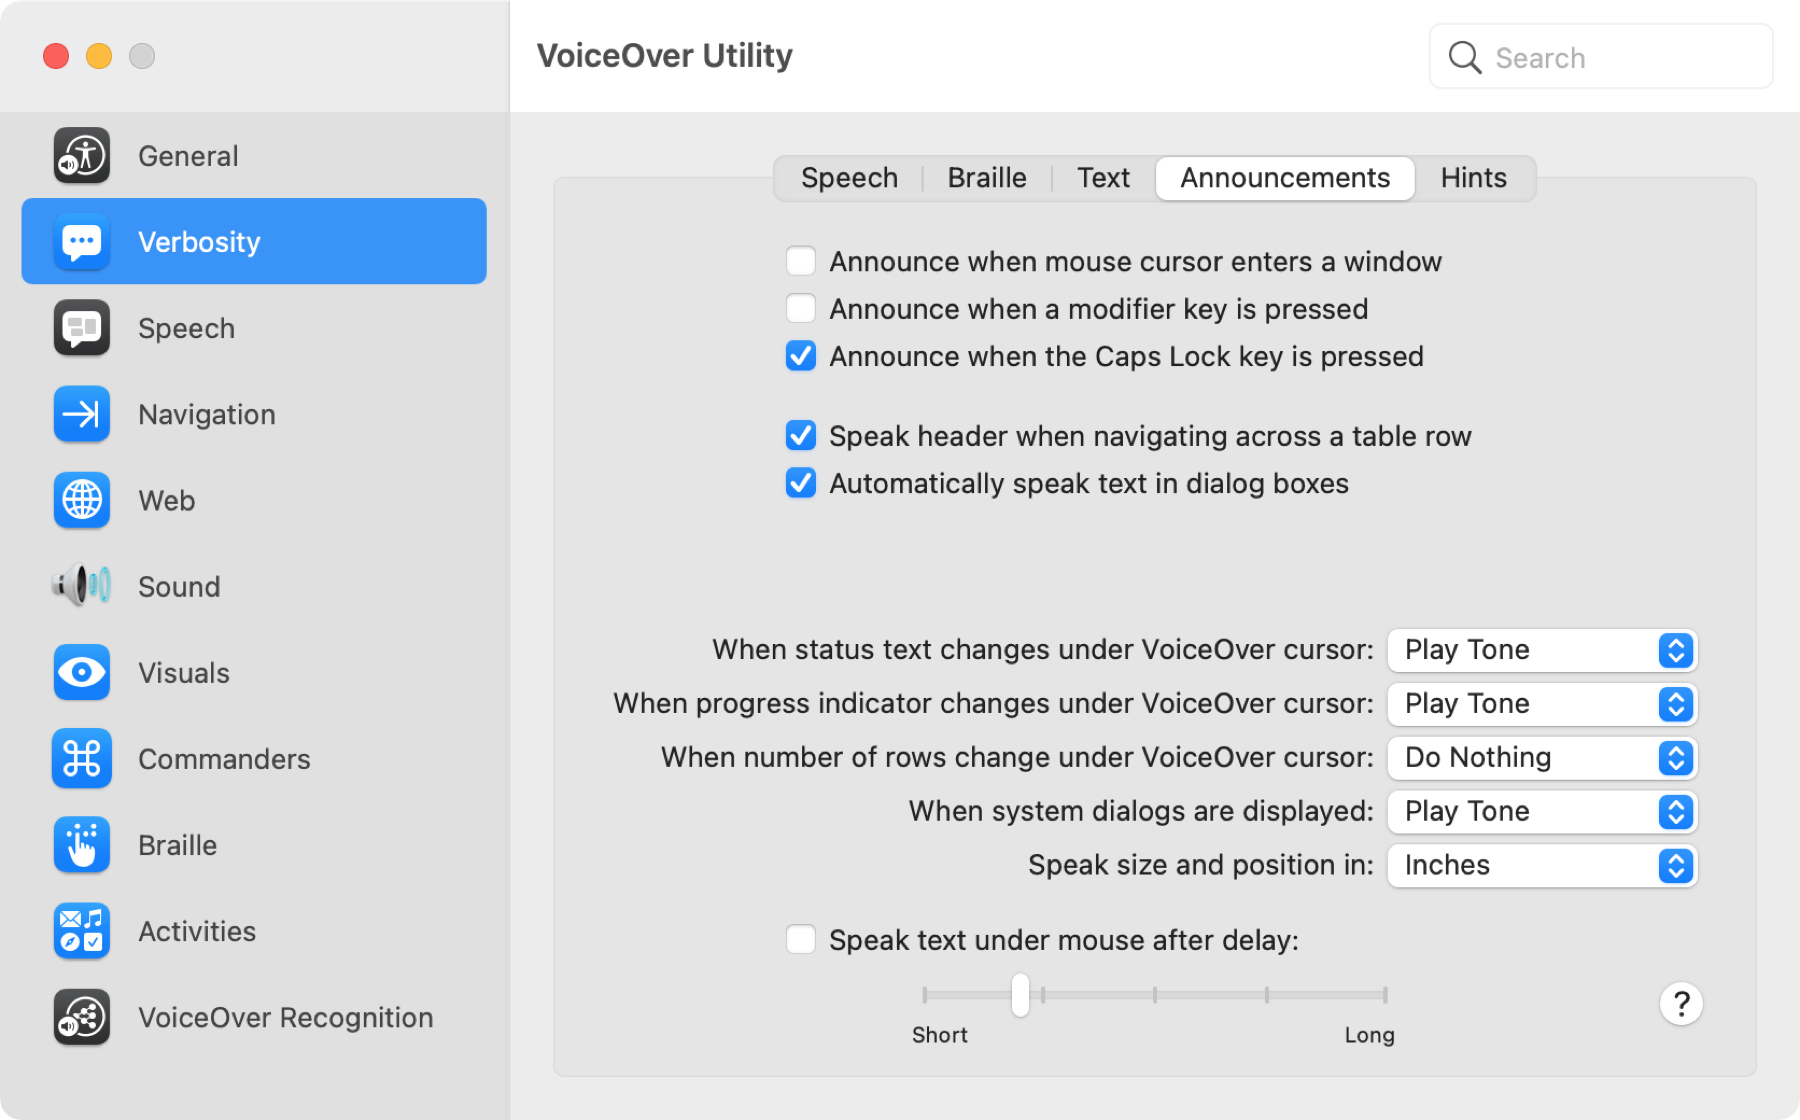 VoiceOver Utility Announcements